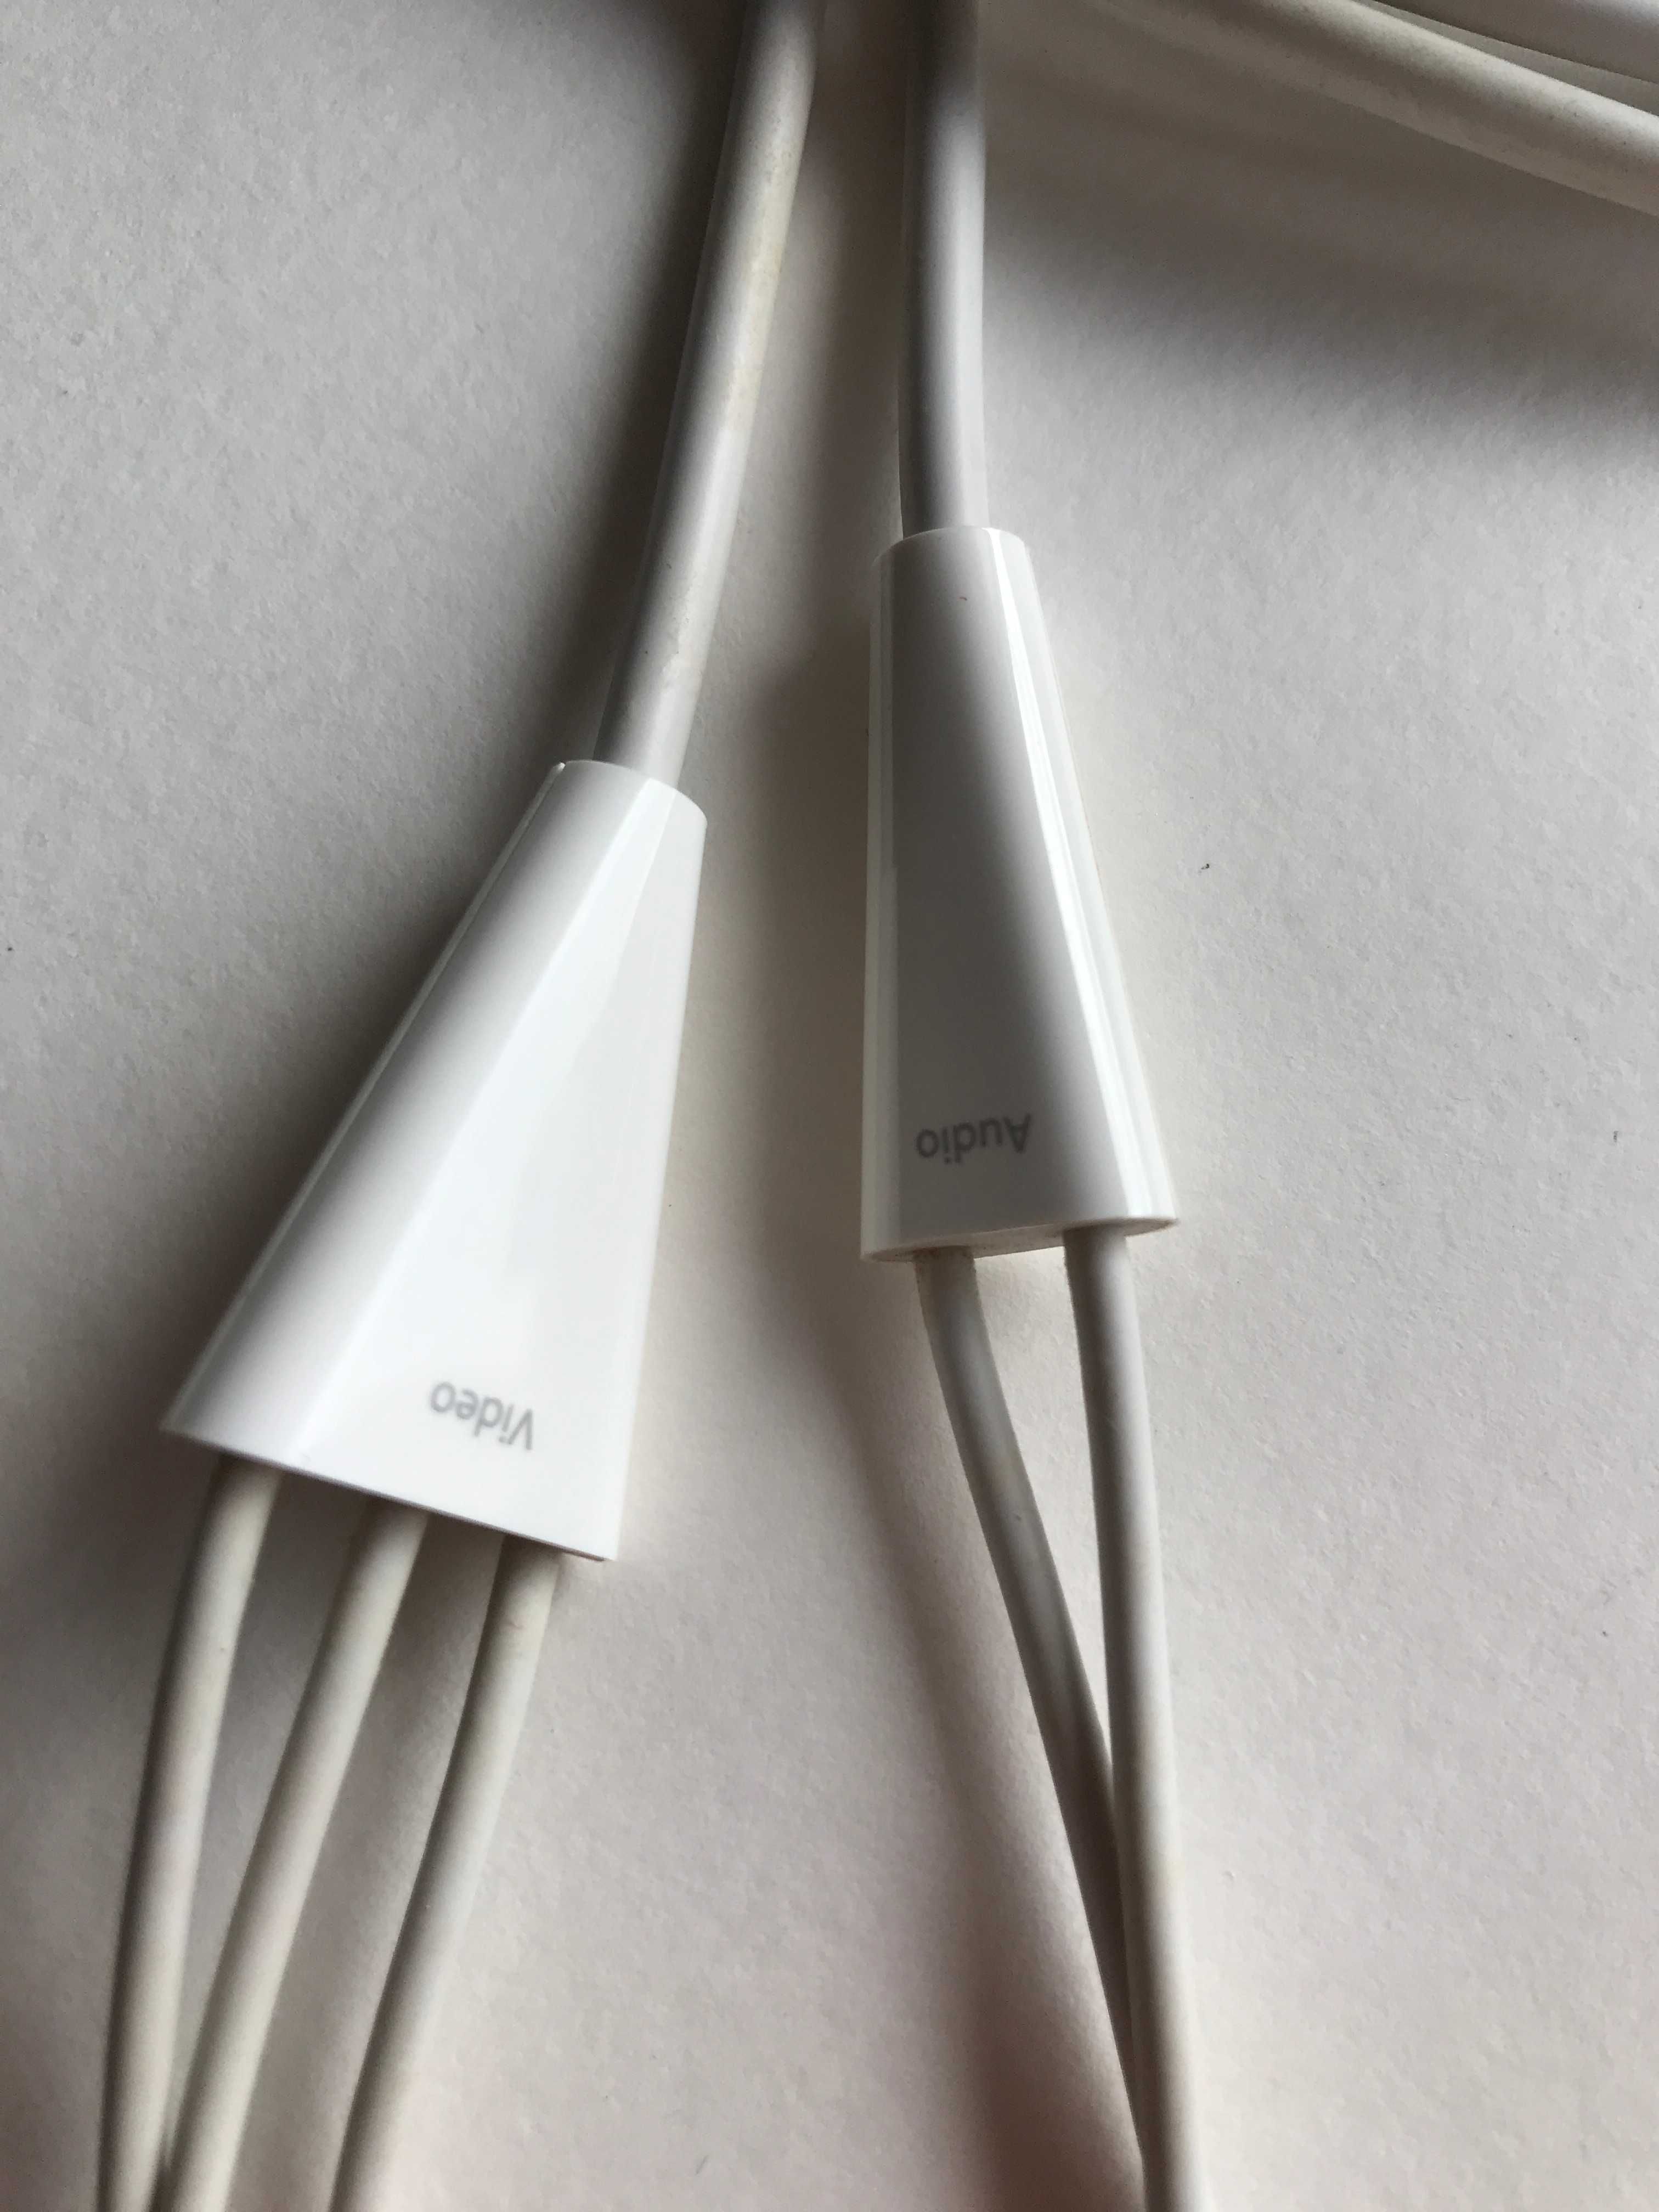 Apple Component AV Cable for iPod or iPhone